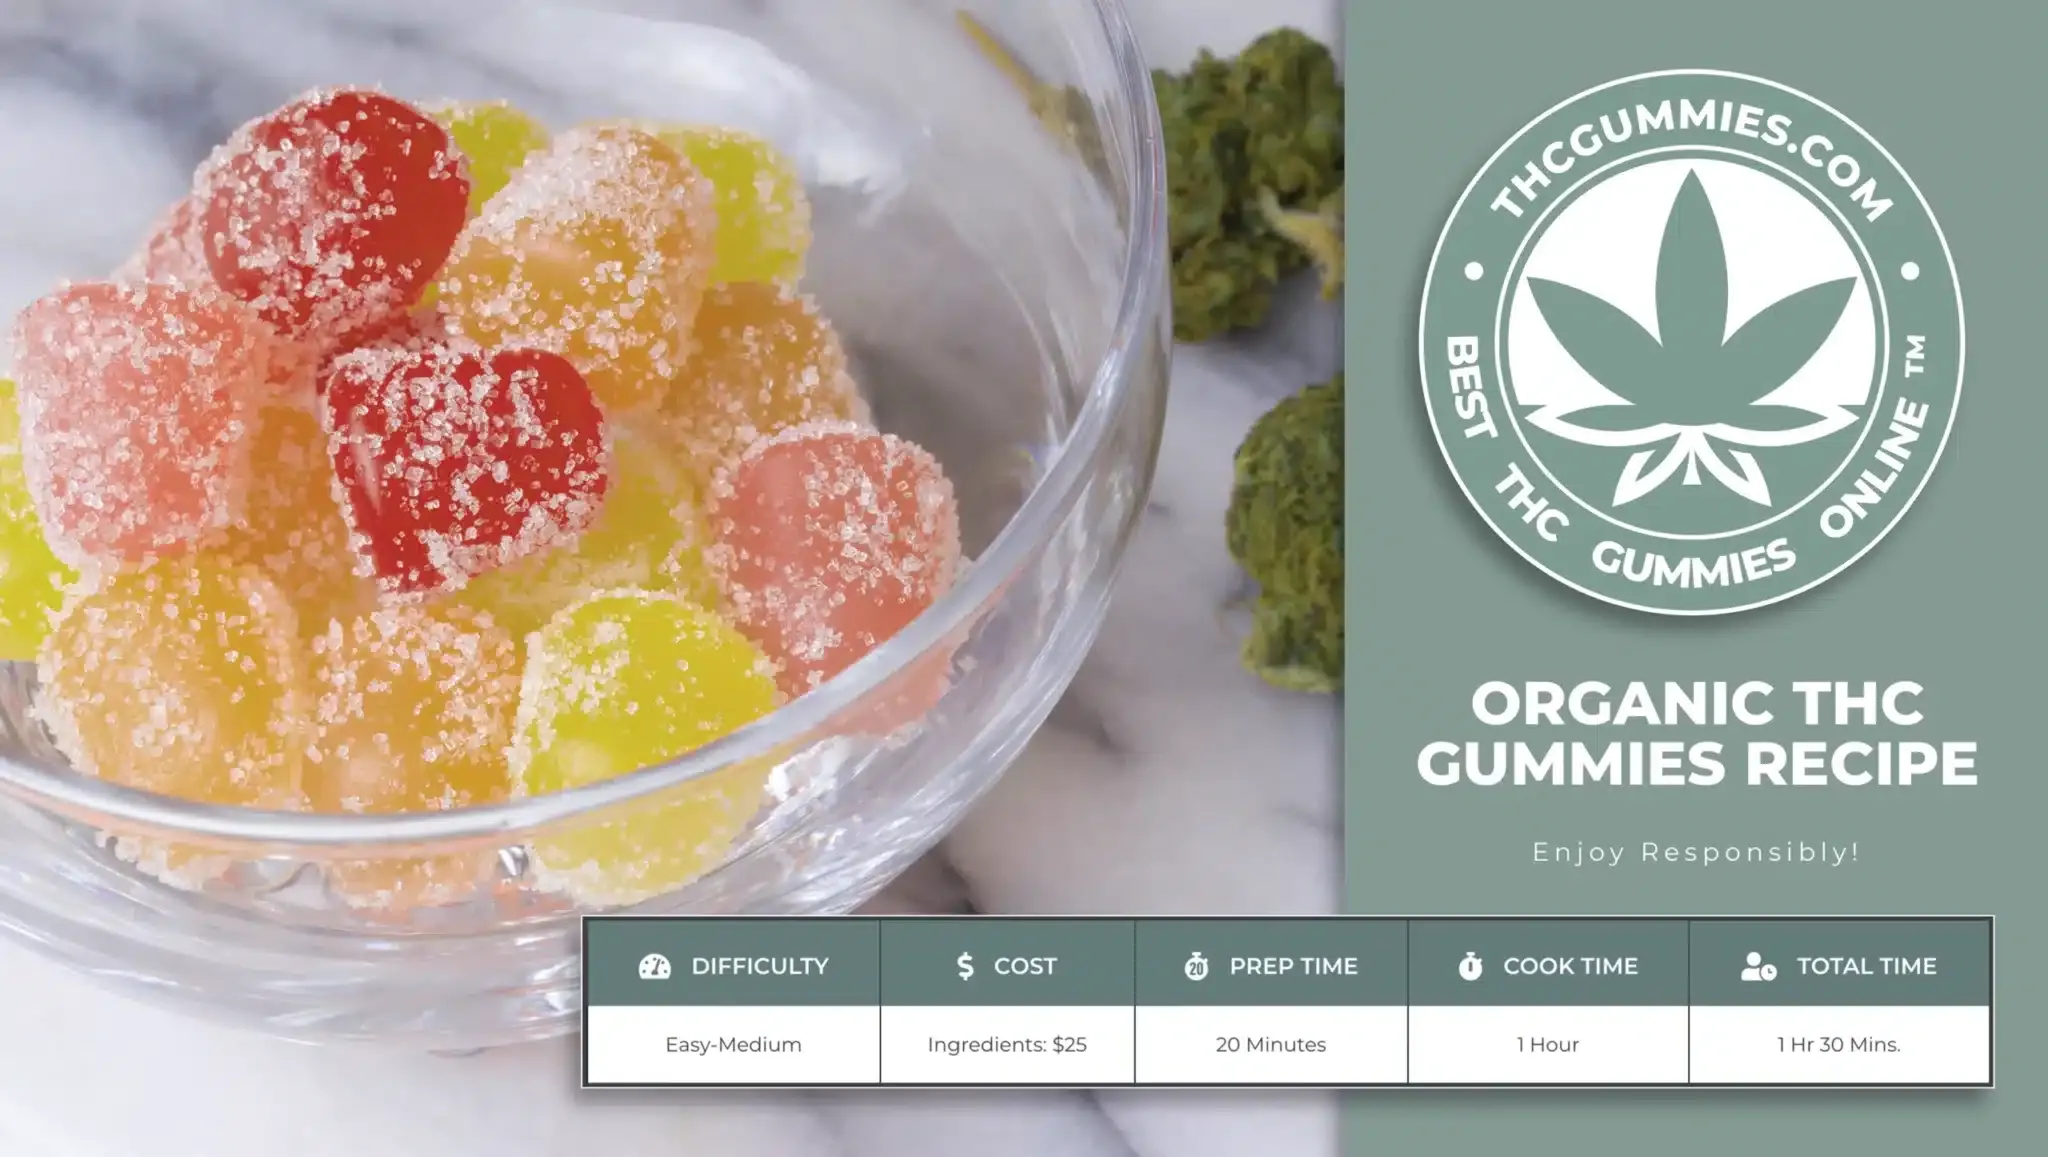 Organic recipe for thc gummies with chart of recipe features scaled by thcgummies. Com.